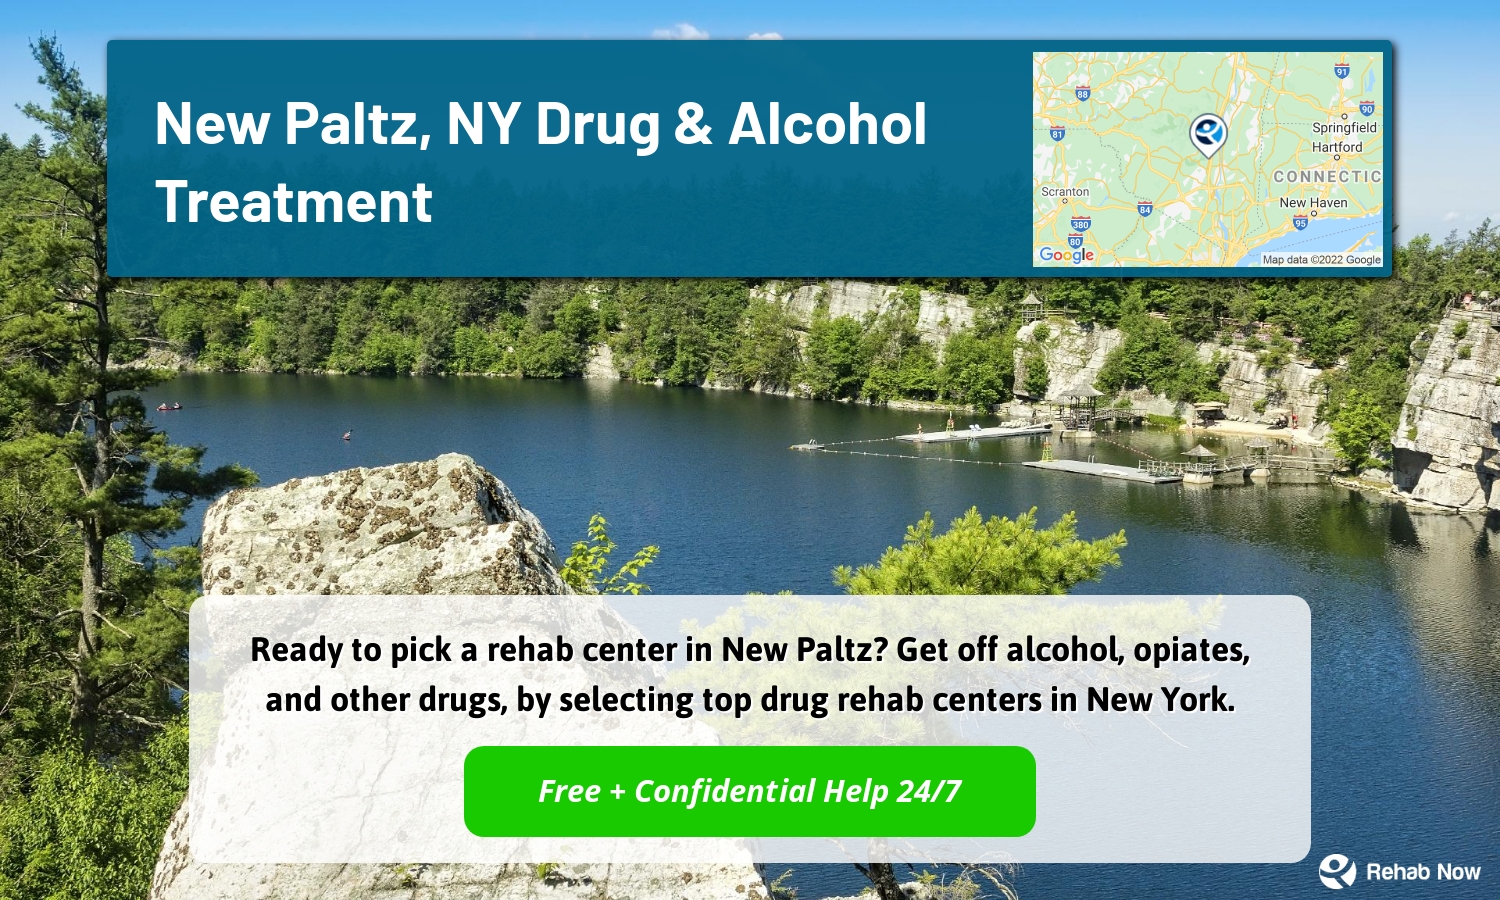 Ready to pick a rehab center in New Paltz? Get off alcohol, opiates, and other drugs, by selecting top drug rehab centers in New York.